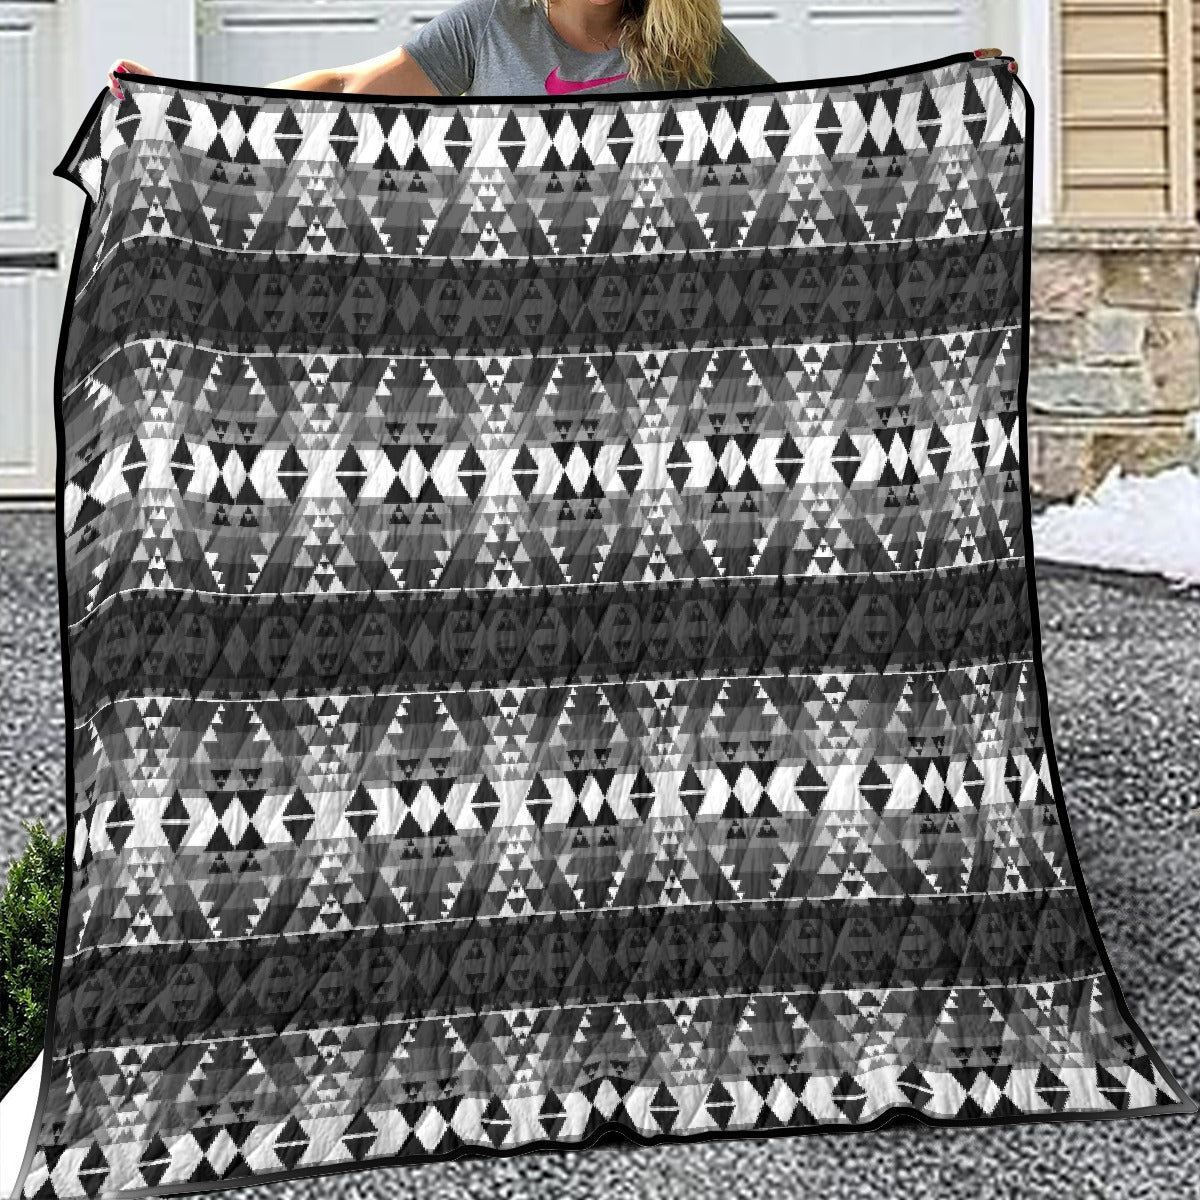 Writing on Stone Black and White Lightweight & Breathable Quilt With Edge-wrapping Strips